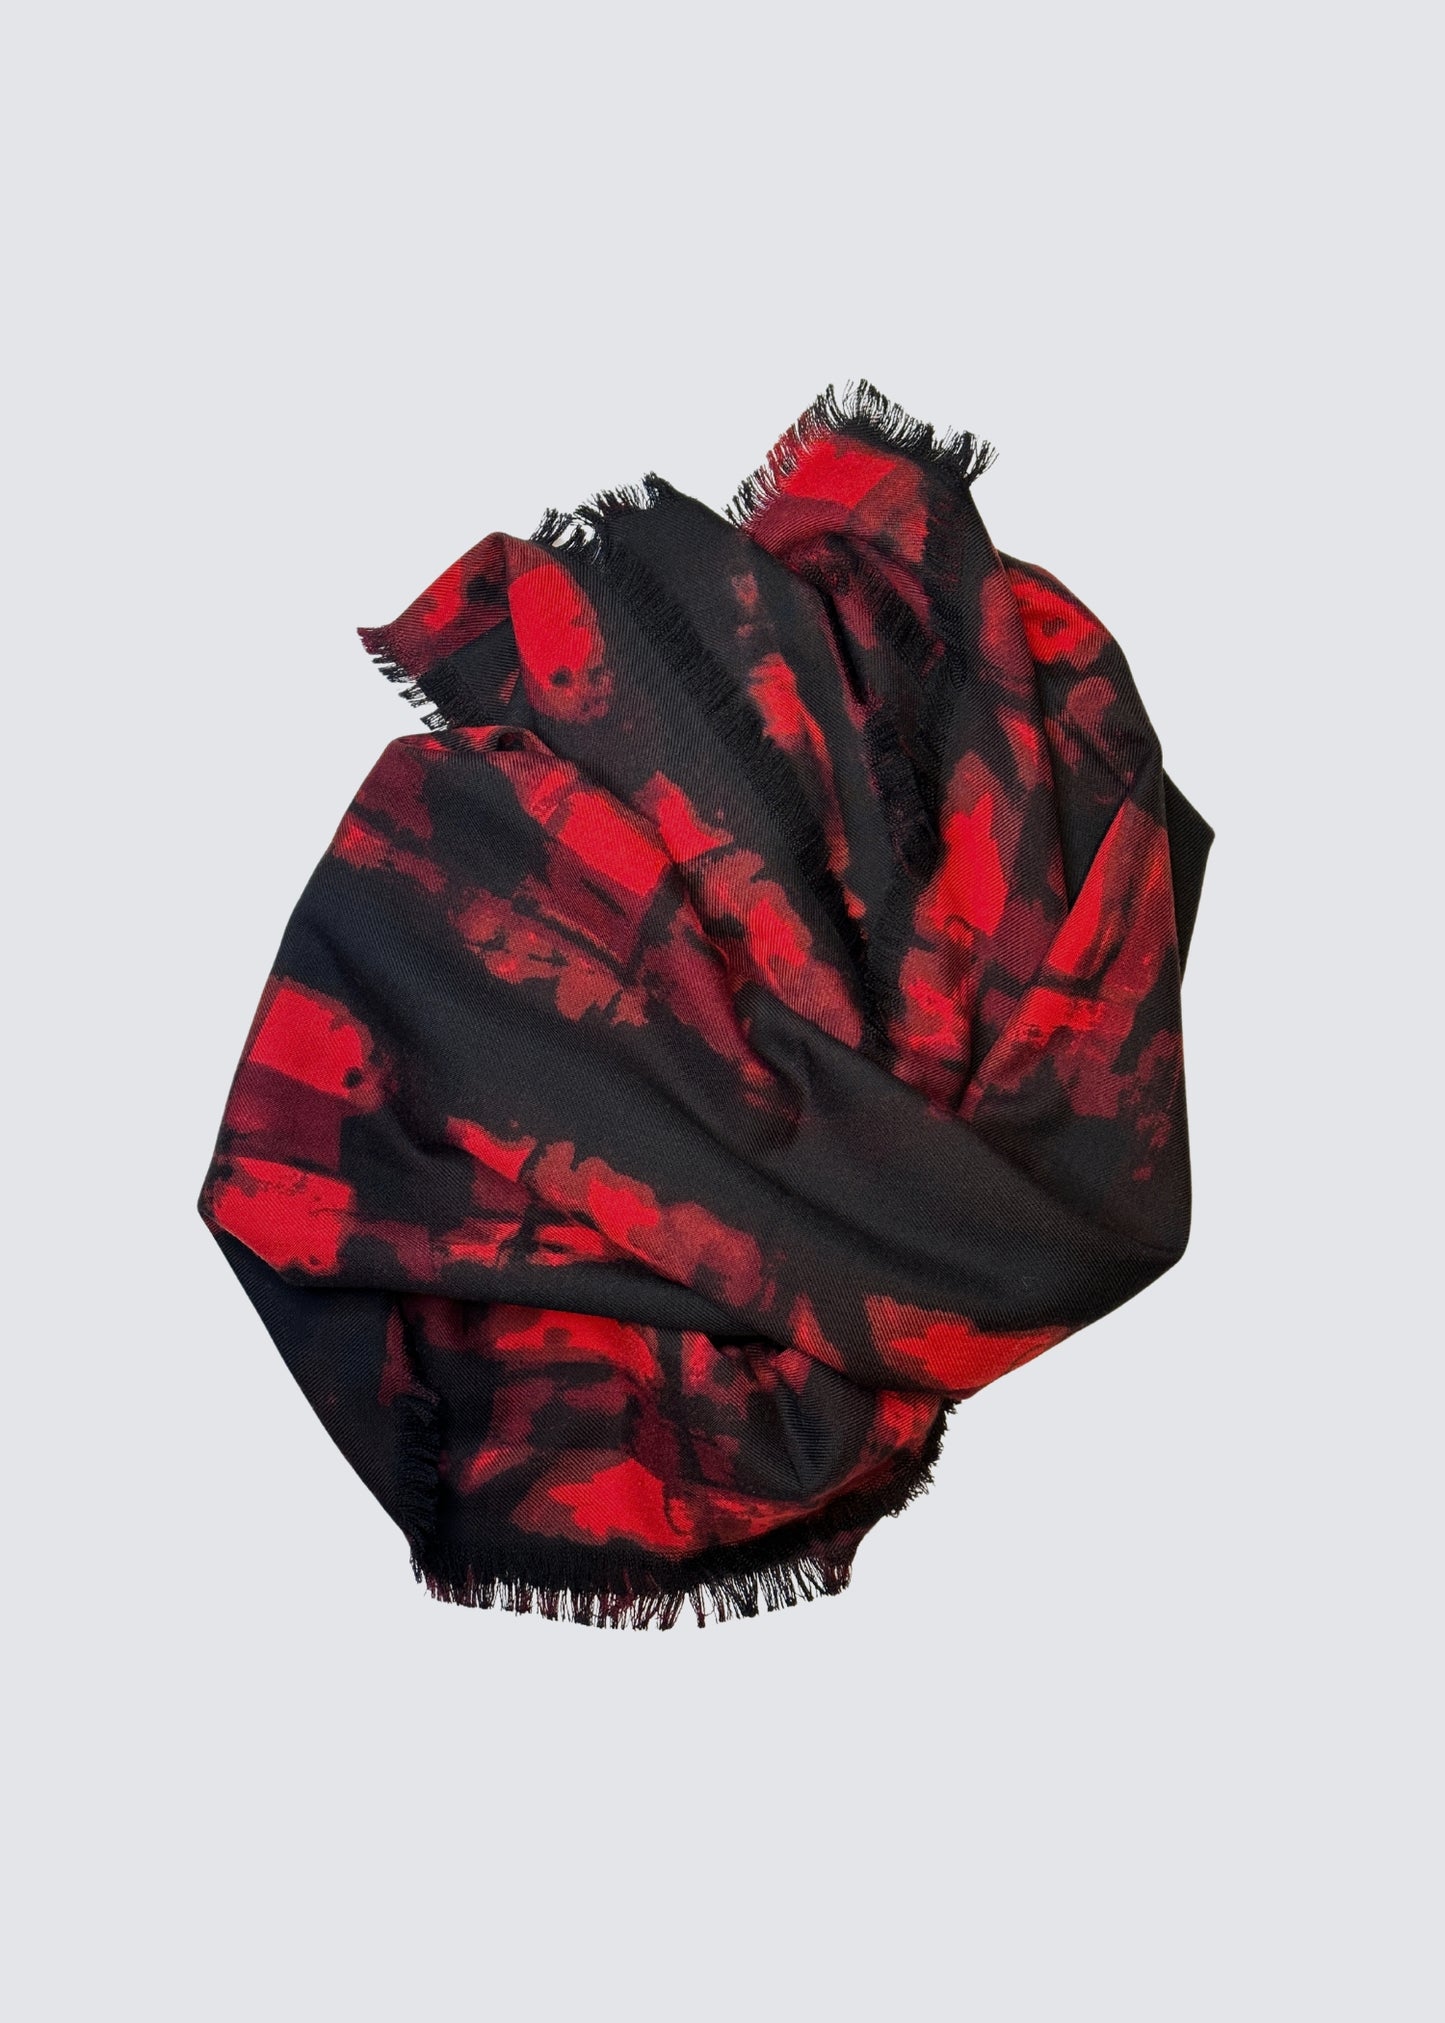 Bohemian, Red, Scarf